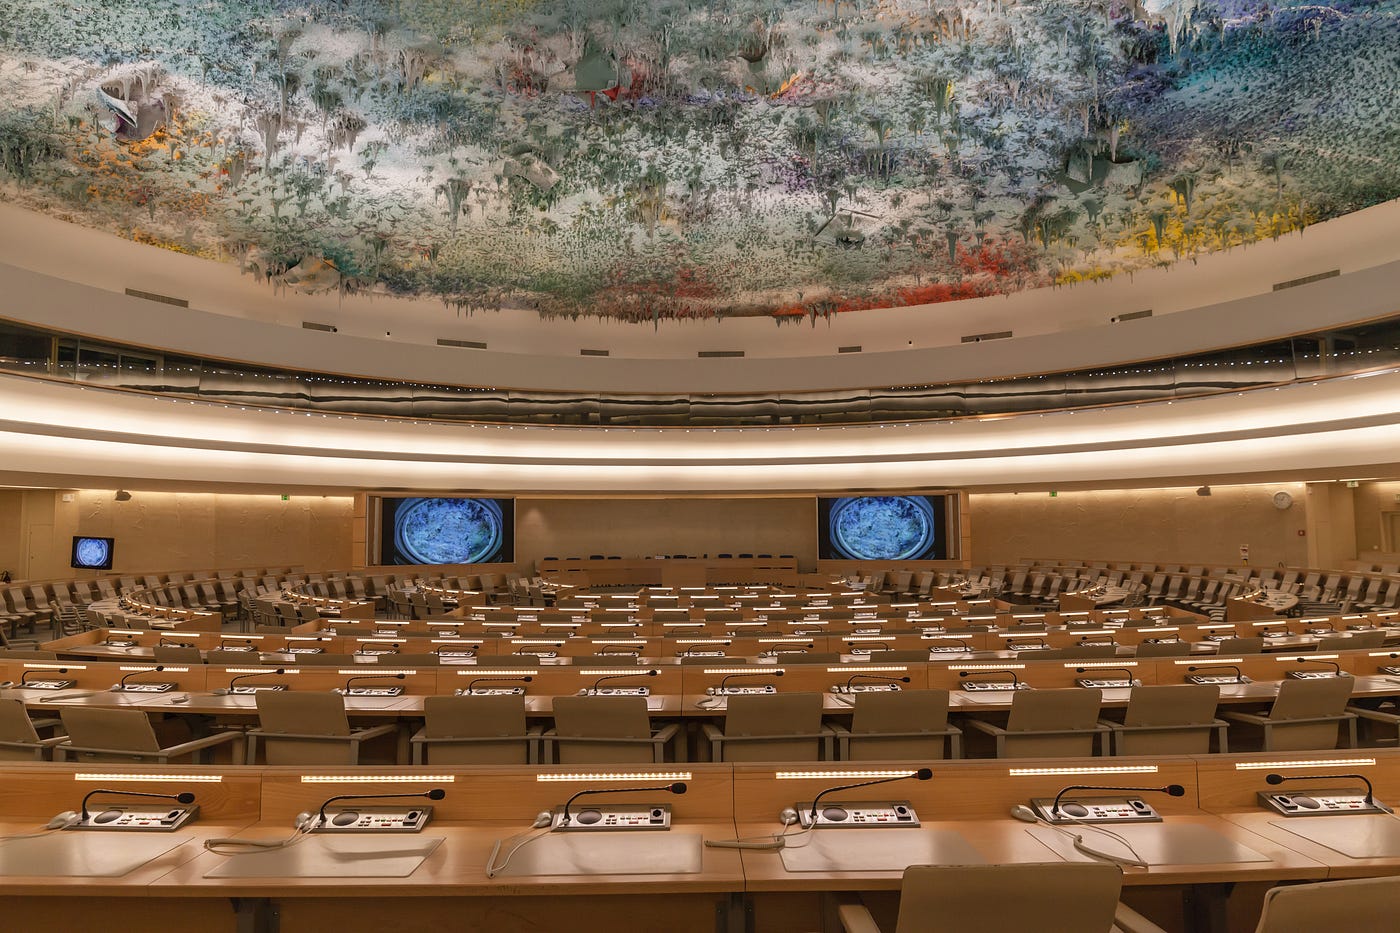 Geneva, Switzerland — Human Rights and Alliance of Civilizations Room in UN Geneva used by the United Nations Human Rights Council with ceiling sculpture by the prominent contemporary Spanish artist Miquel Barcelo, Photo 52055638 © Vogelsp | Dreamstime.com